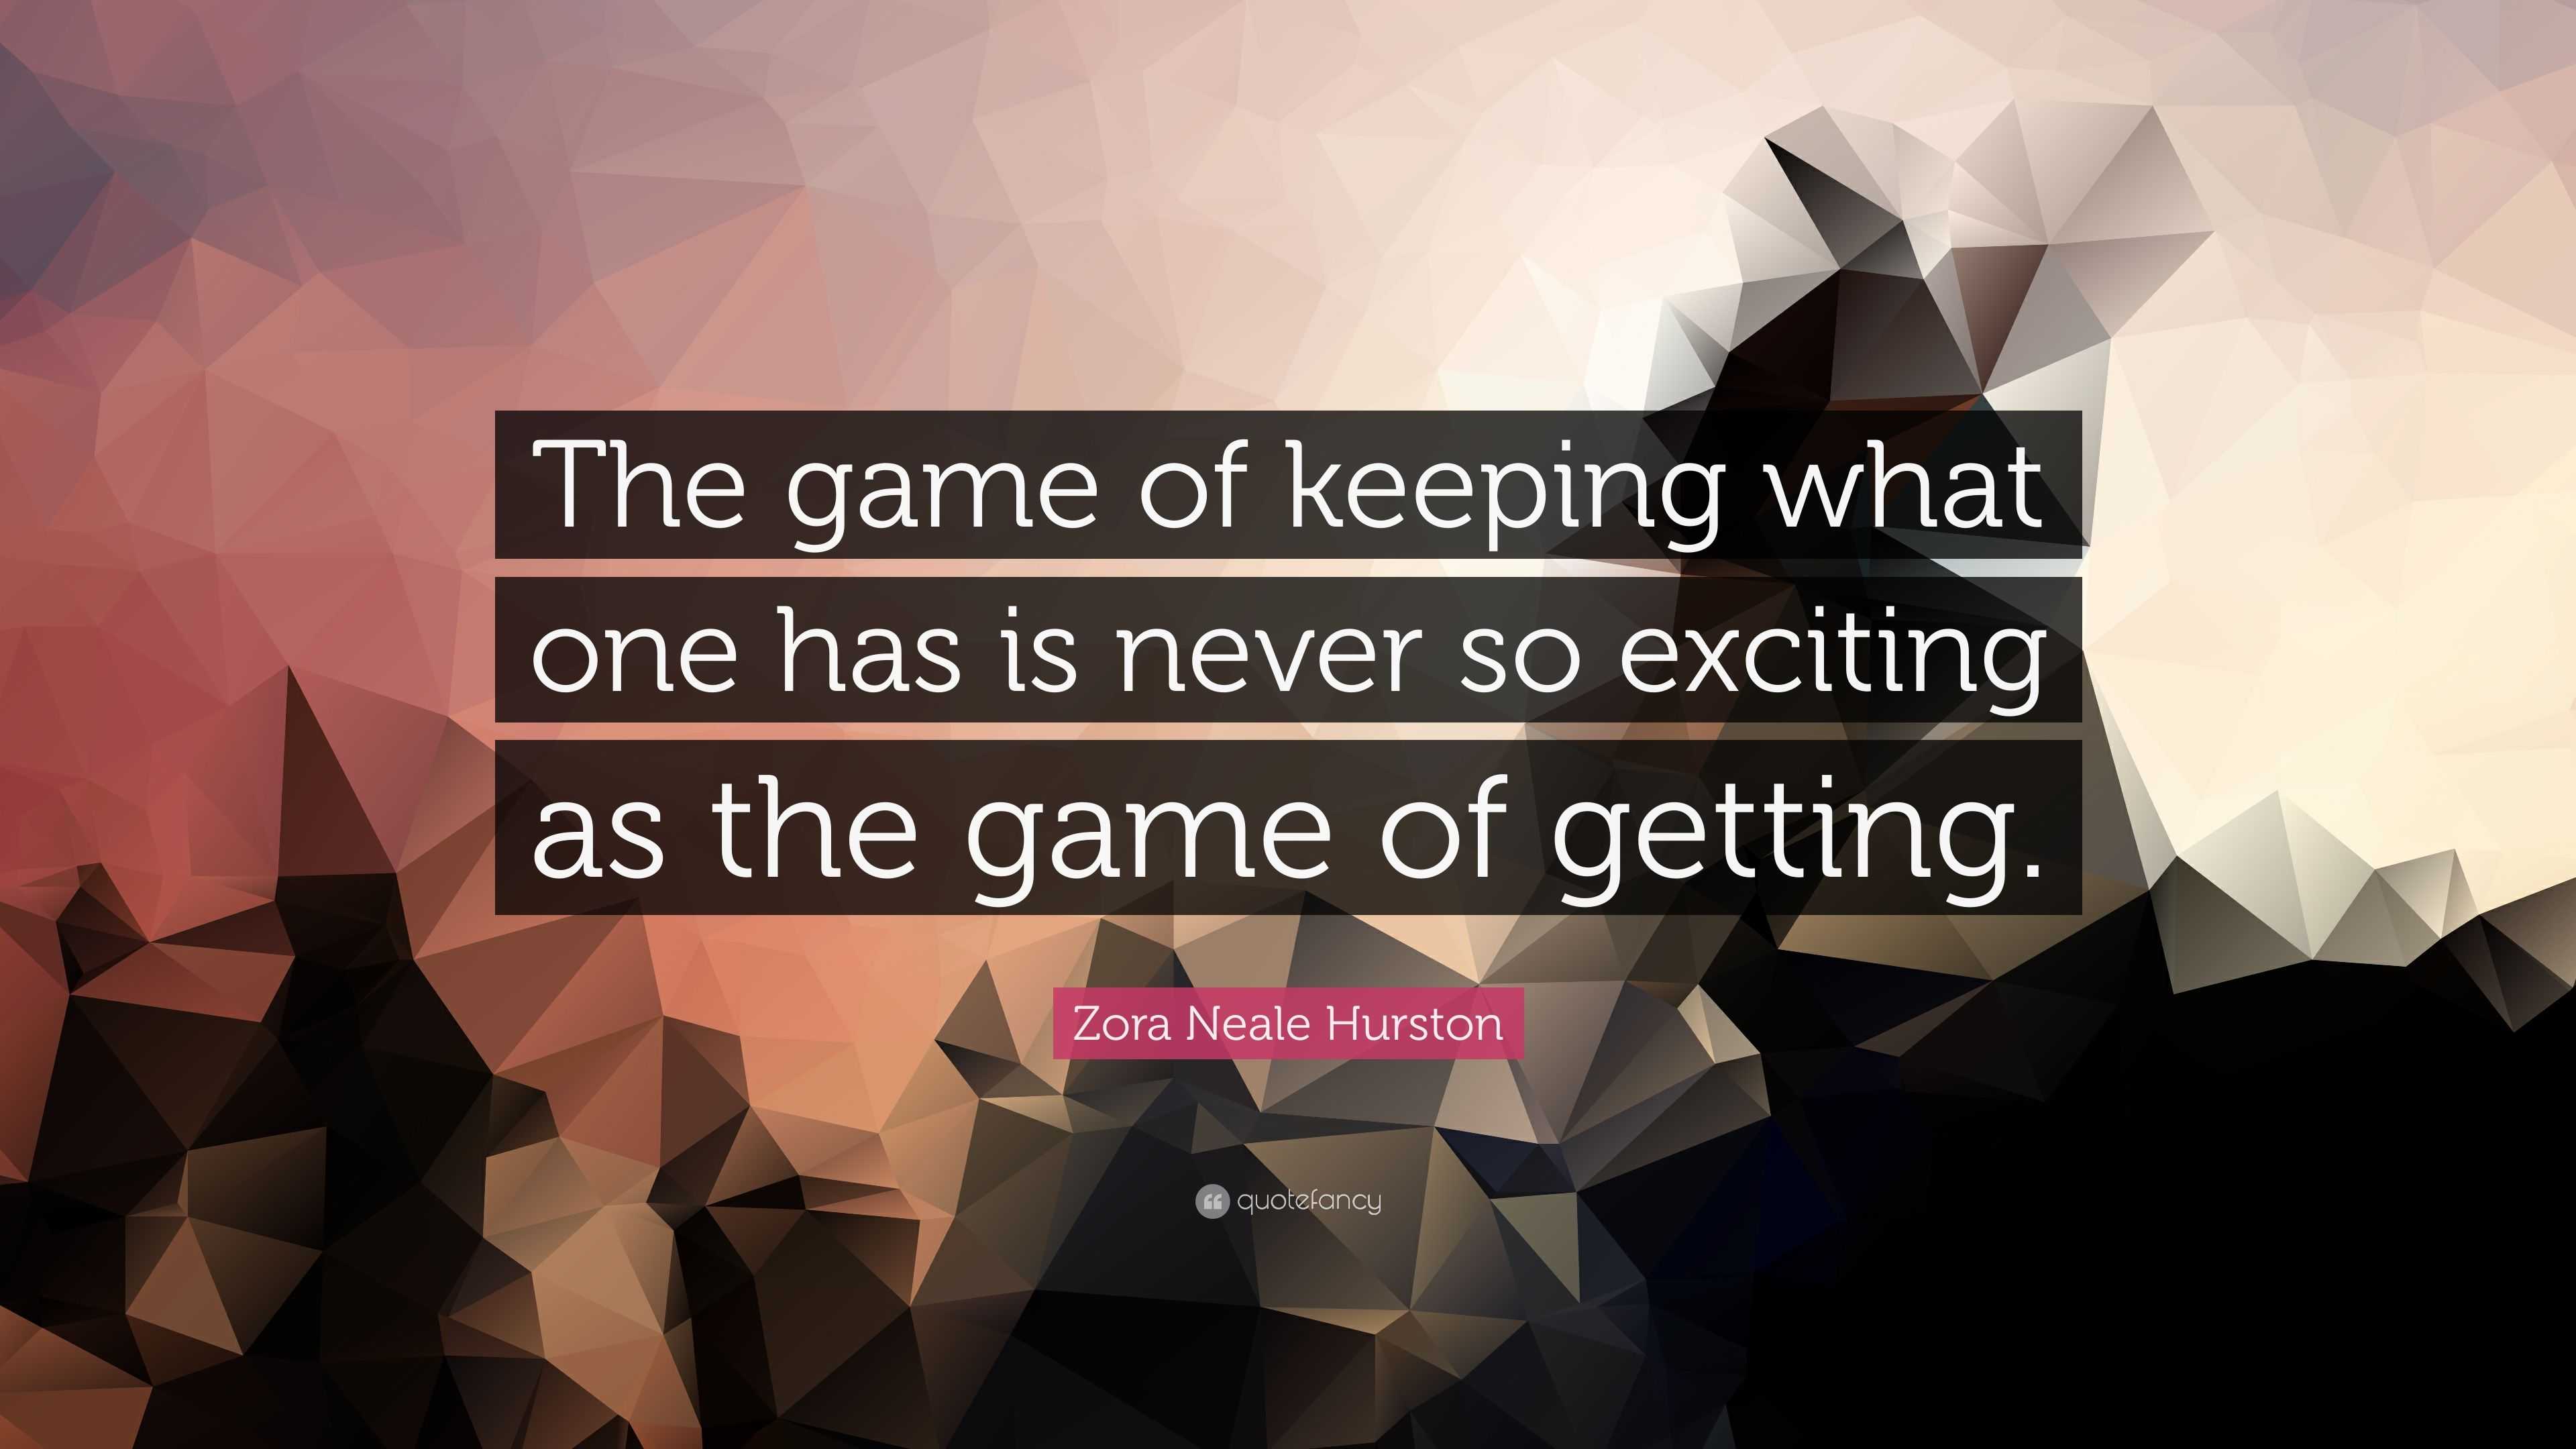 Zora Neale Hurston Quote The Game Of Keeping What One Has Is Never So Excit...